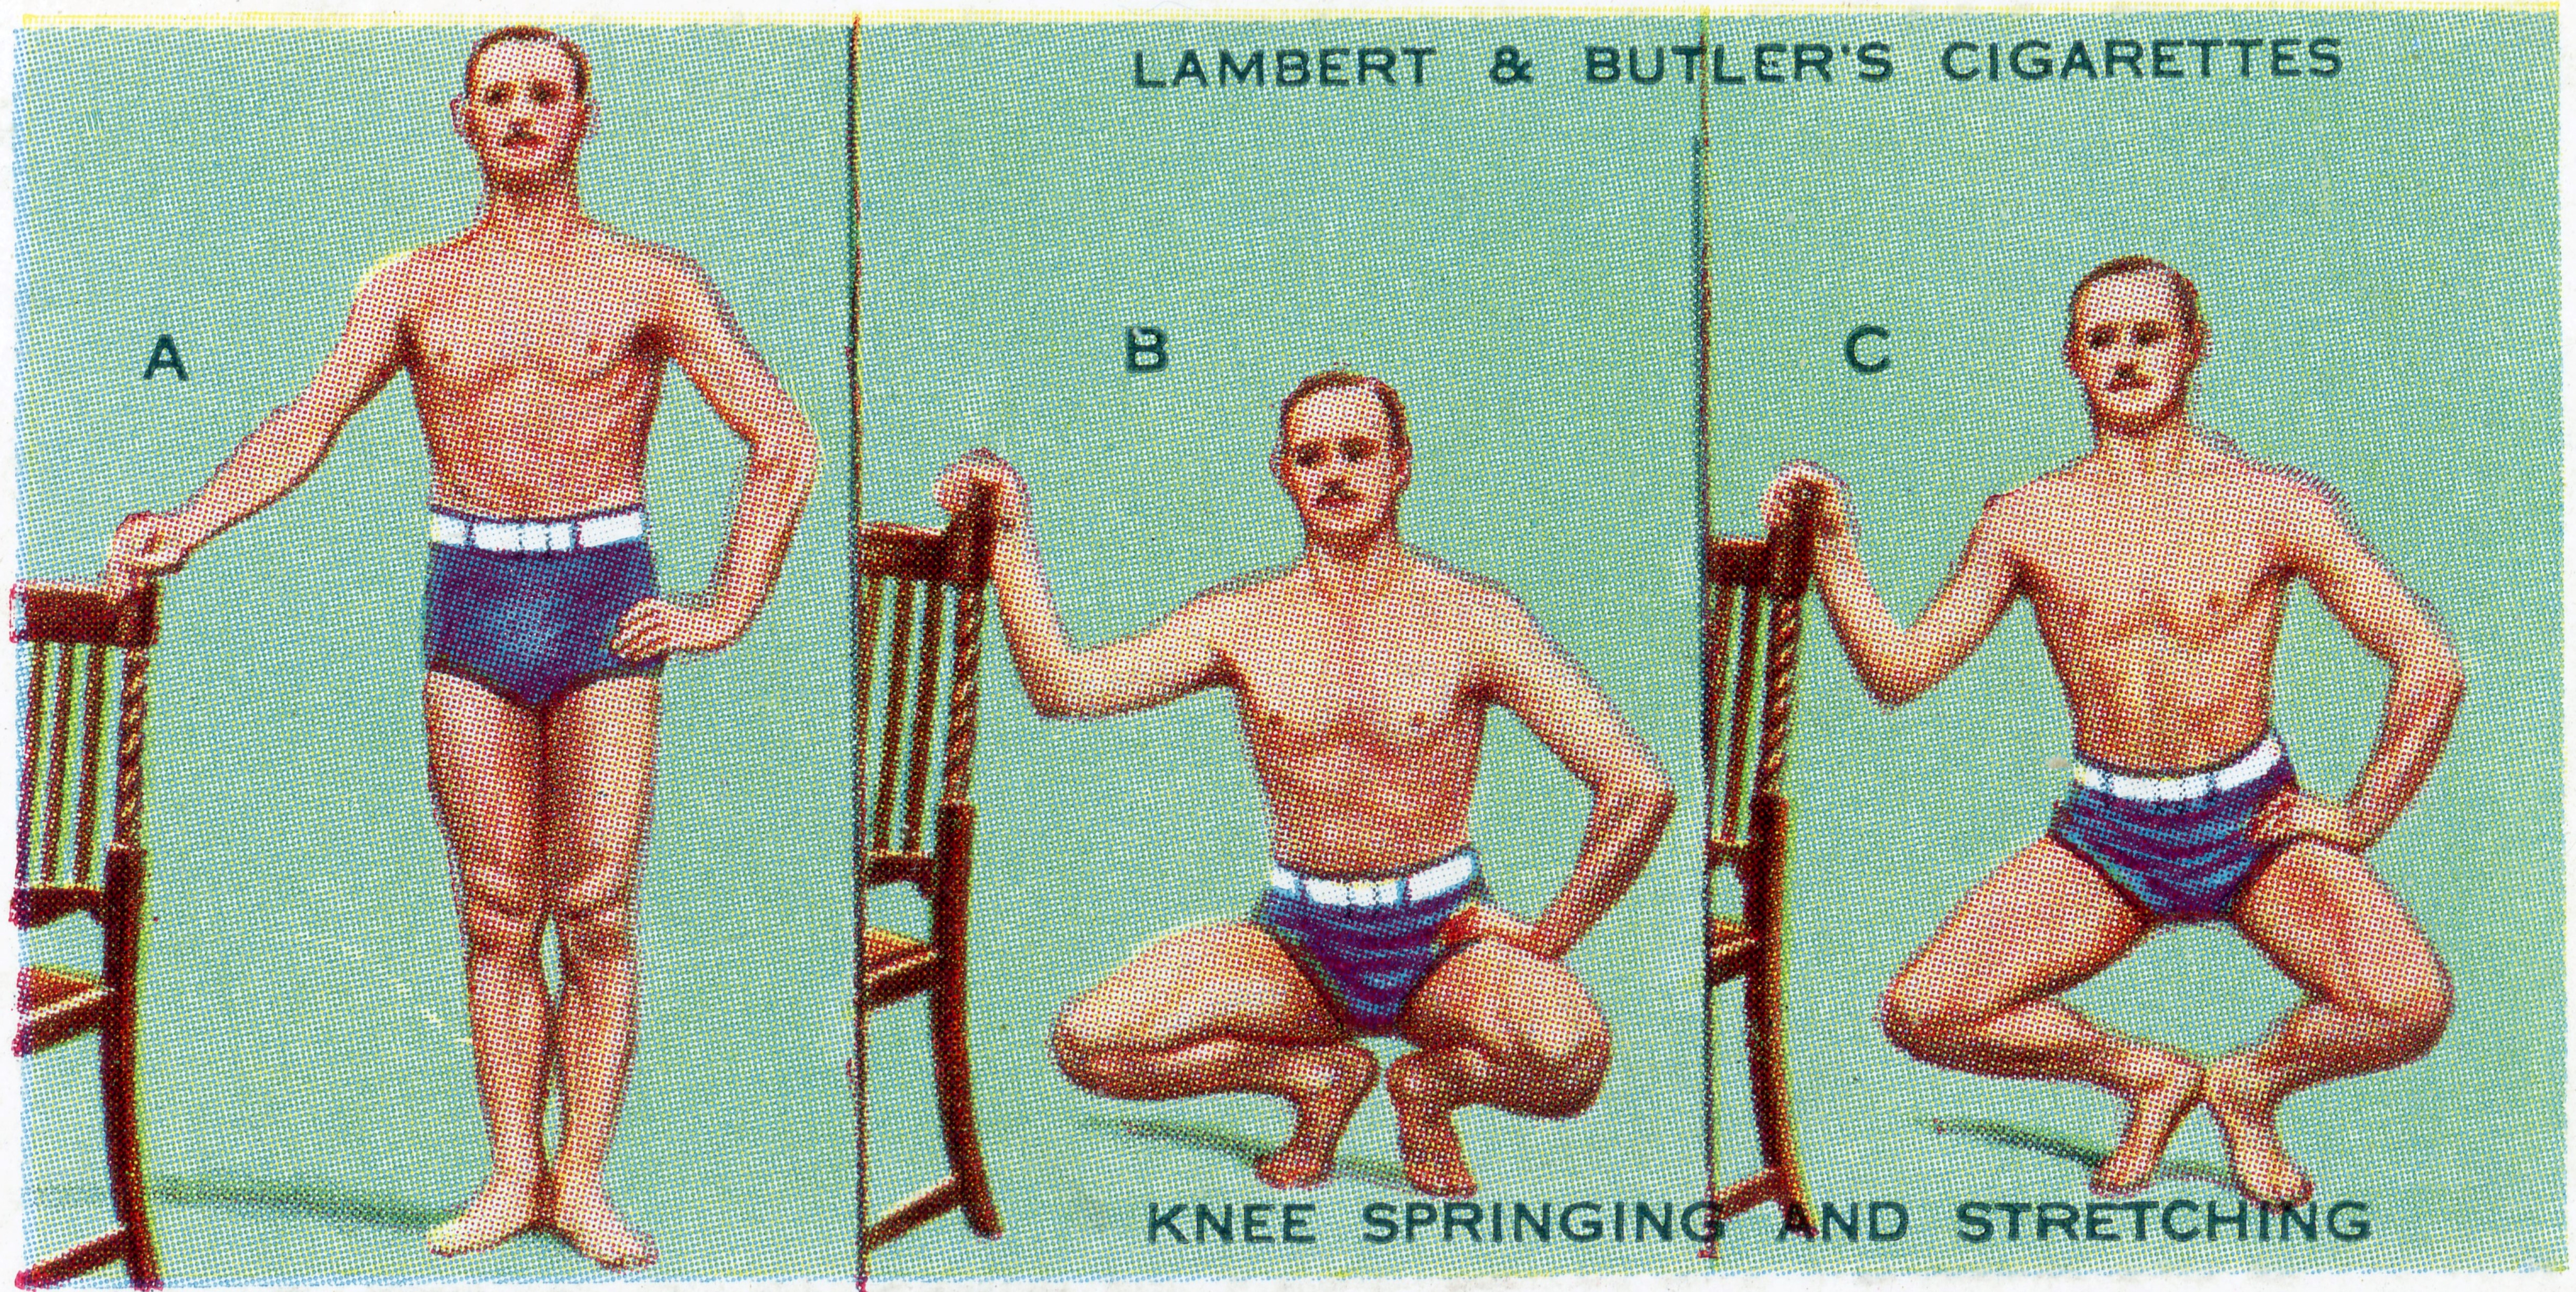 An old tobacco ad that depicts men using chairs to stretch.